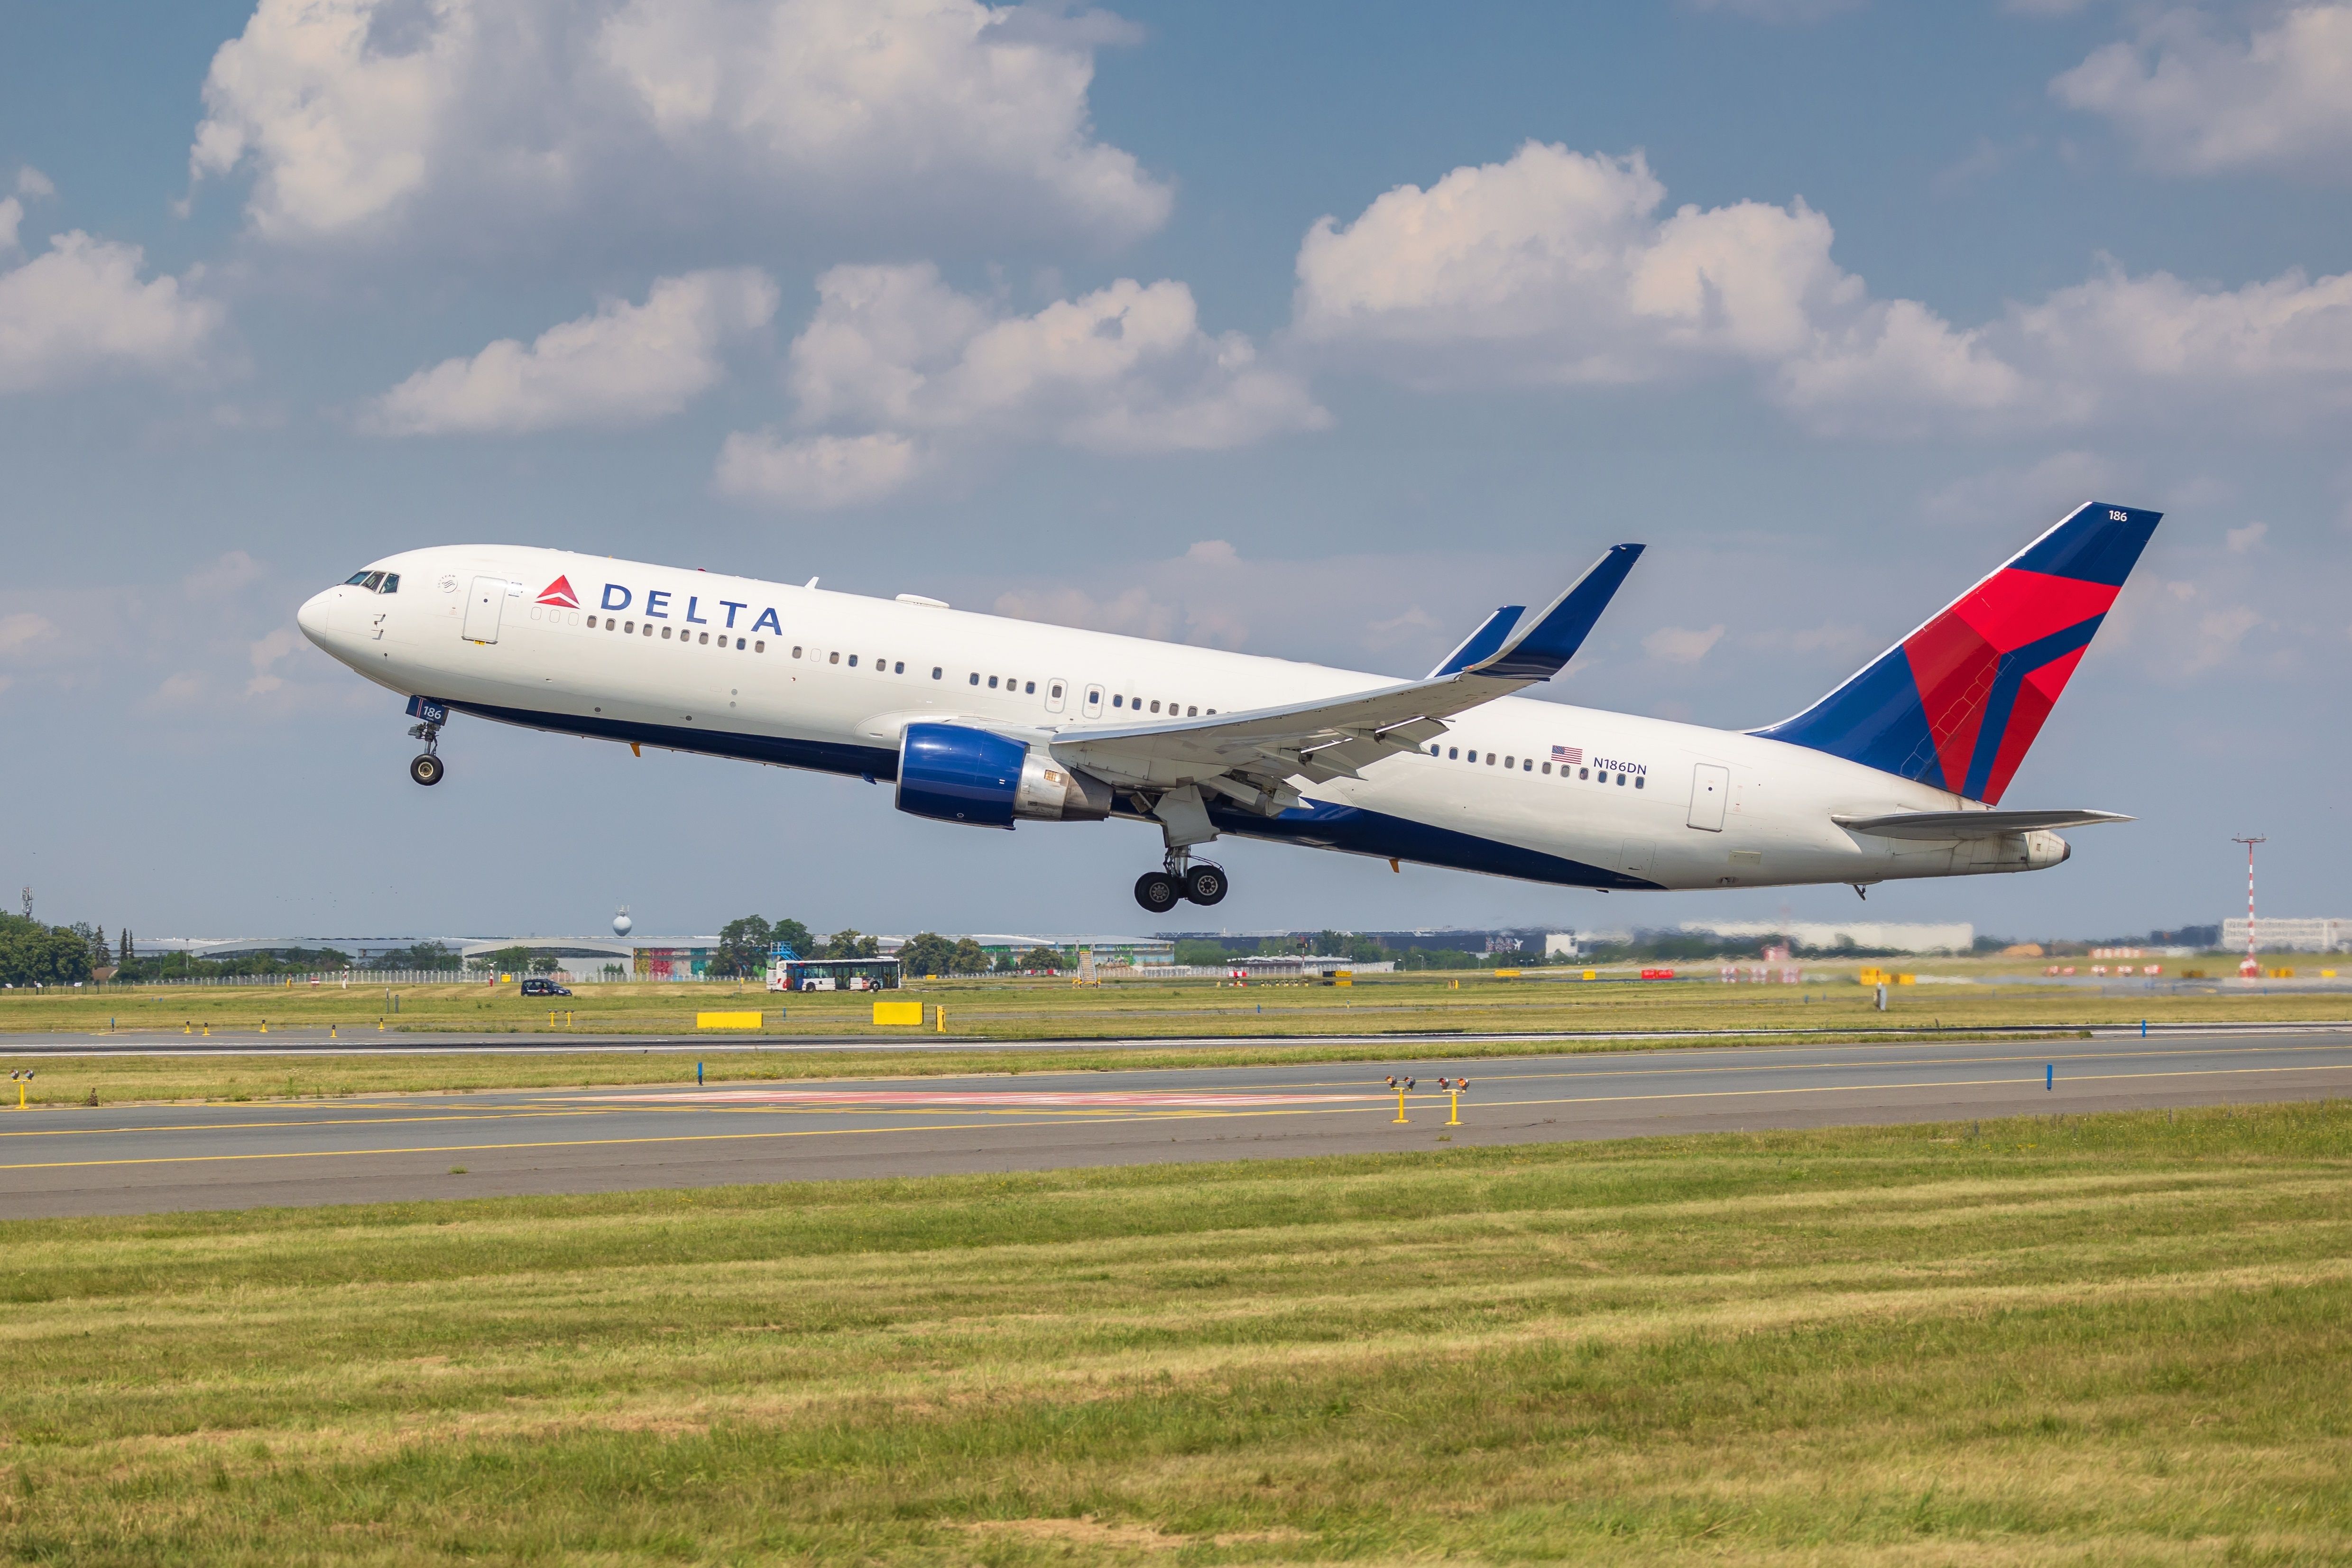 A Delta Air Lines Boeing 767-300 taking off.